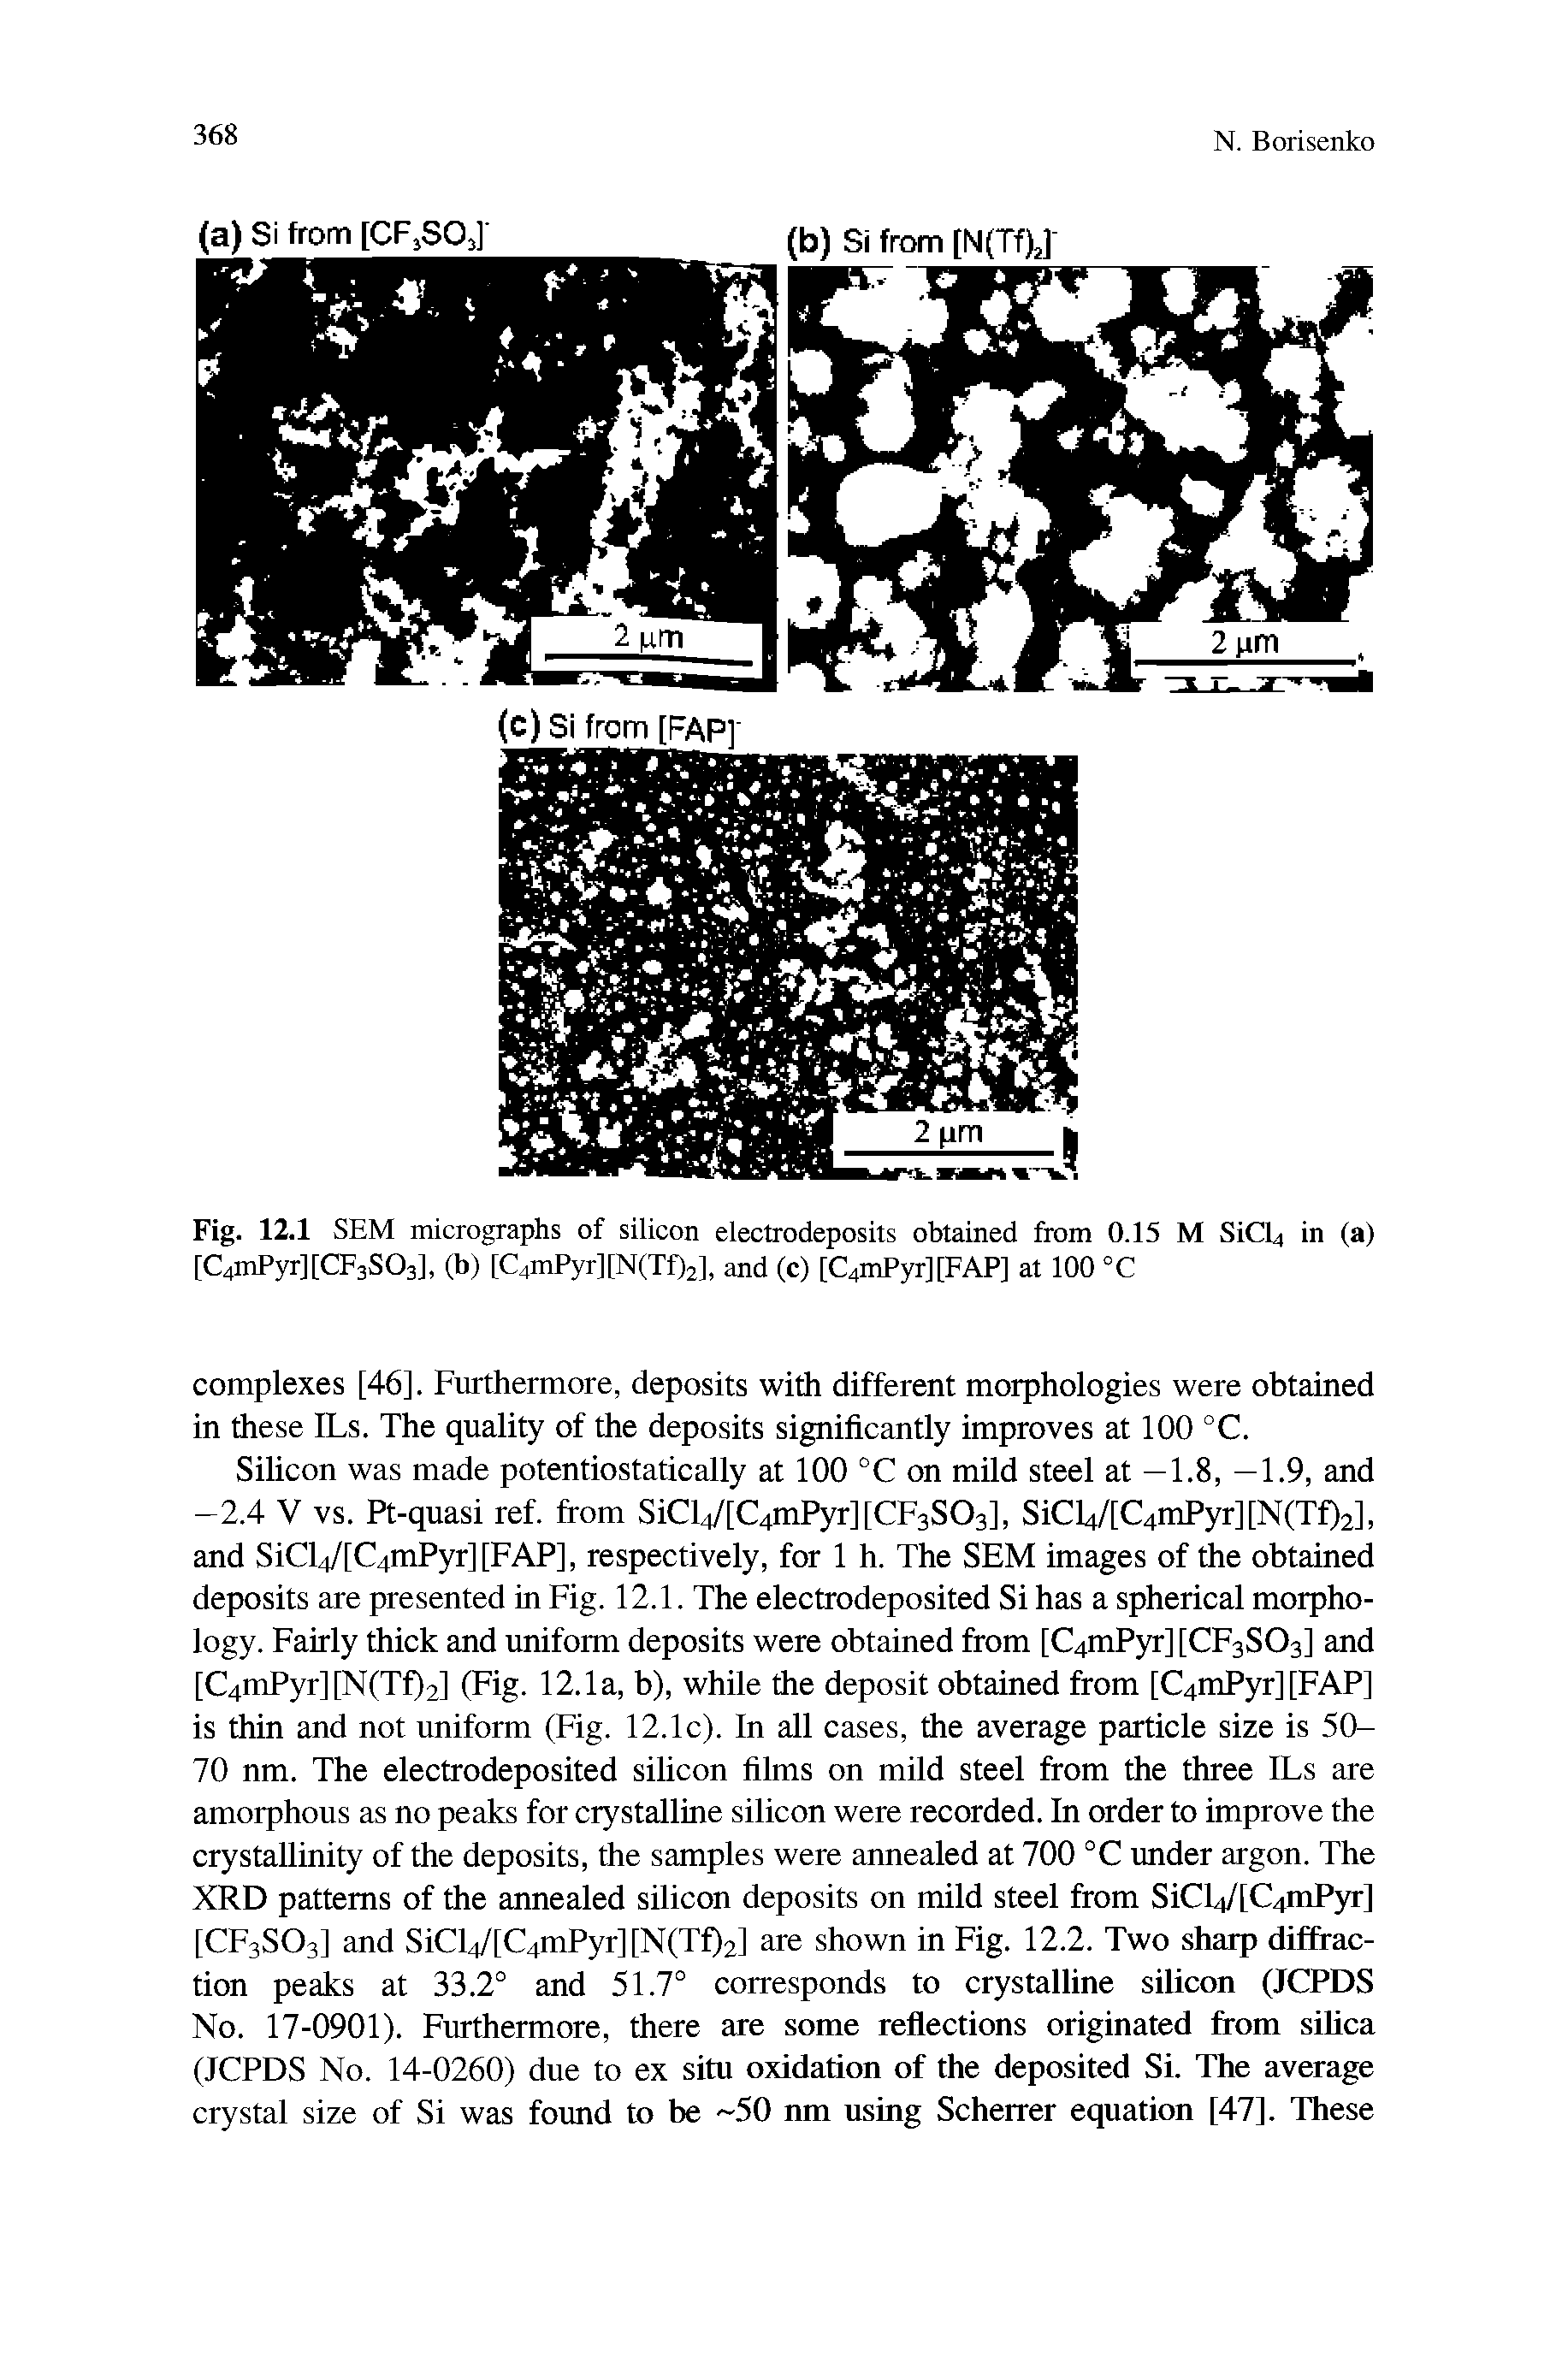 Fig. 12.1 SEM micrographs of silicon electrodeposits obtained from 0.15 M SiCLi in (a) [C4mPyr][Cp3S03], (b) [C4mPyr][N(Tf)2], and (c) [C4mPyr][FAP] at 100 °C...